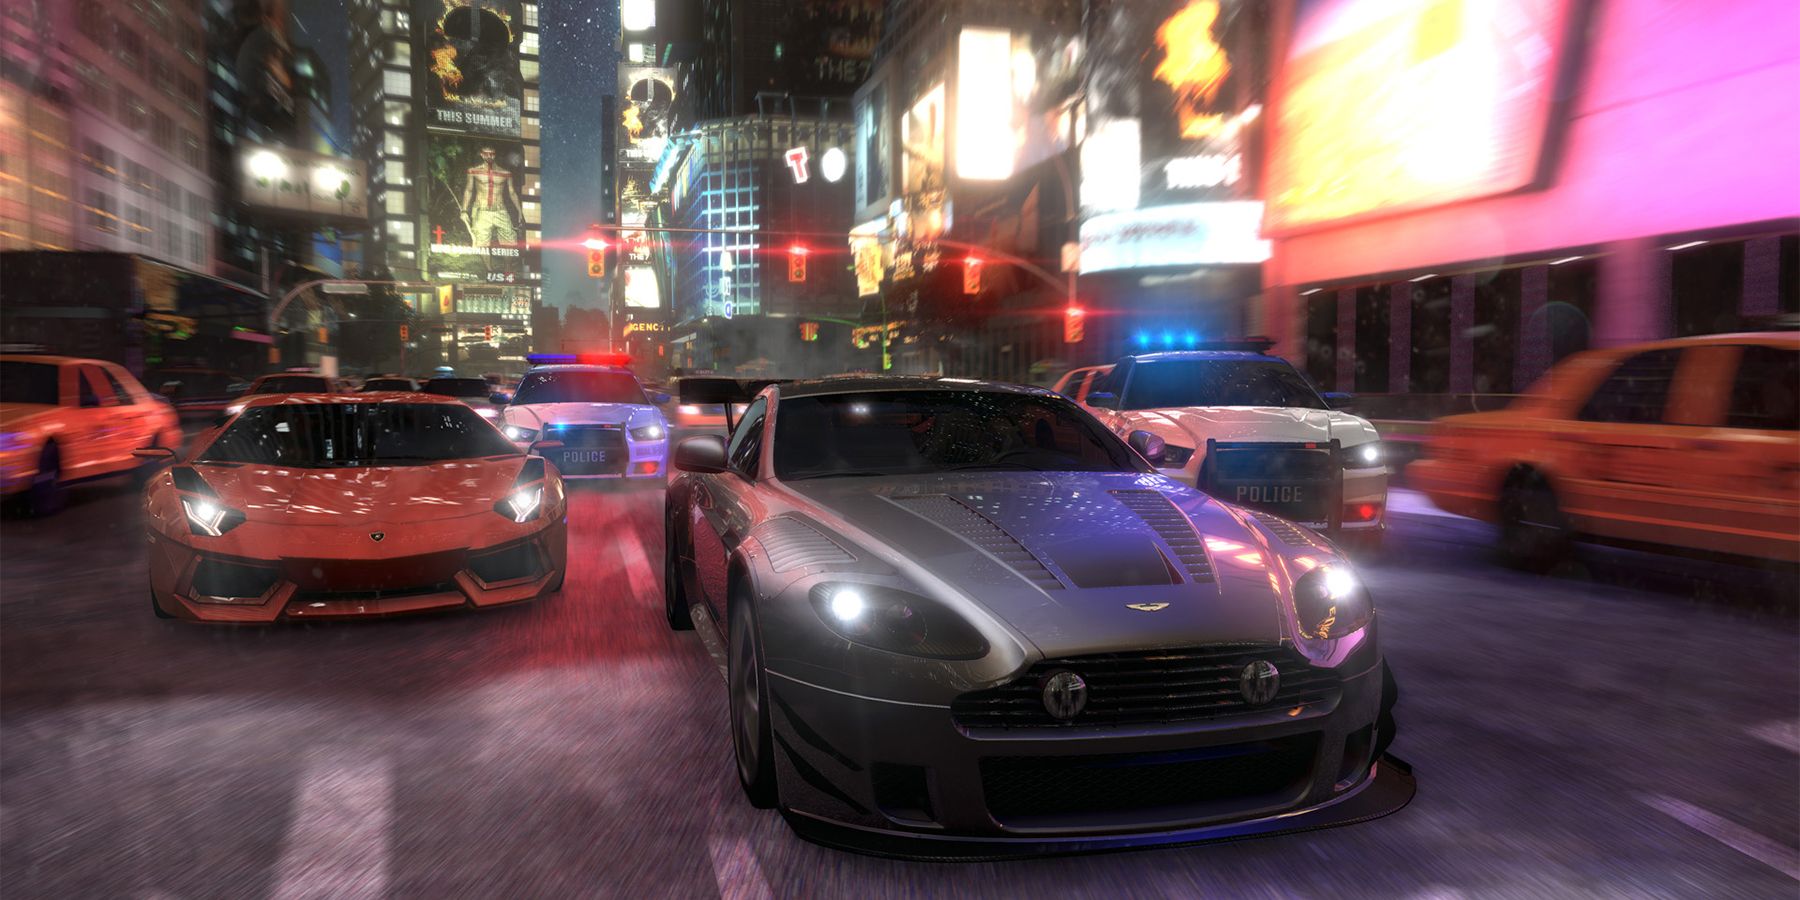 ubisoft reportedly removing access to the crew from buyers’ accounts